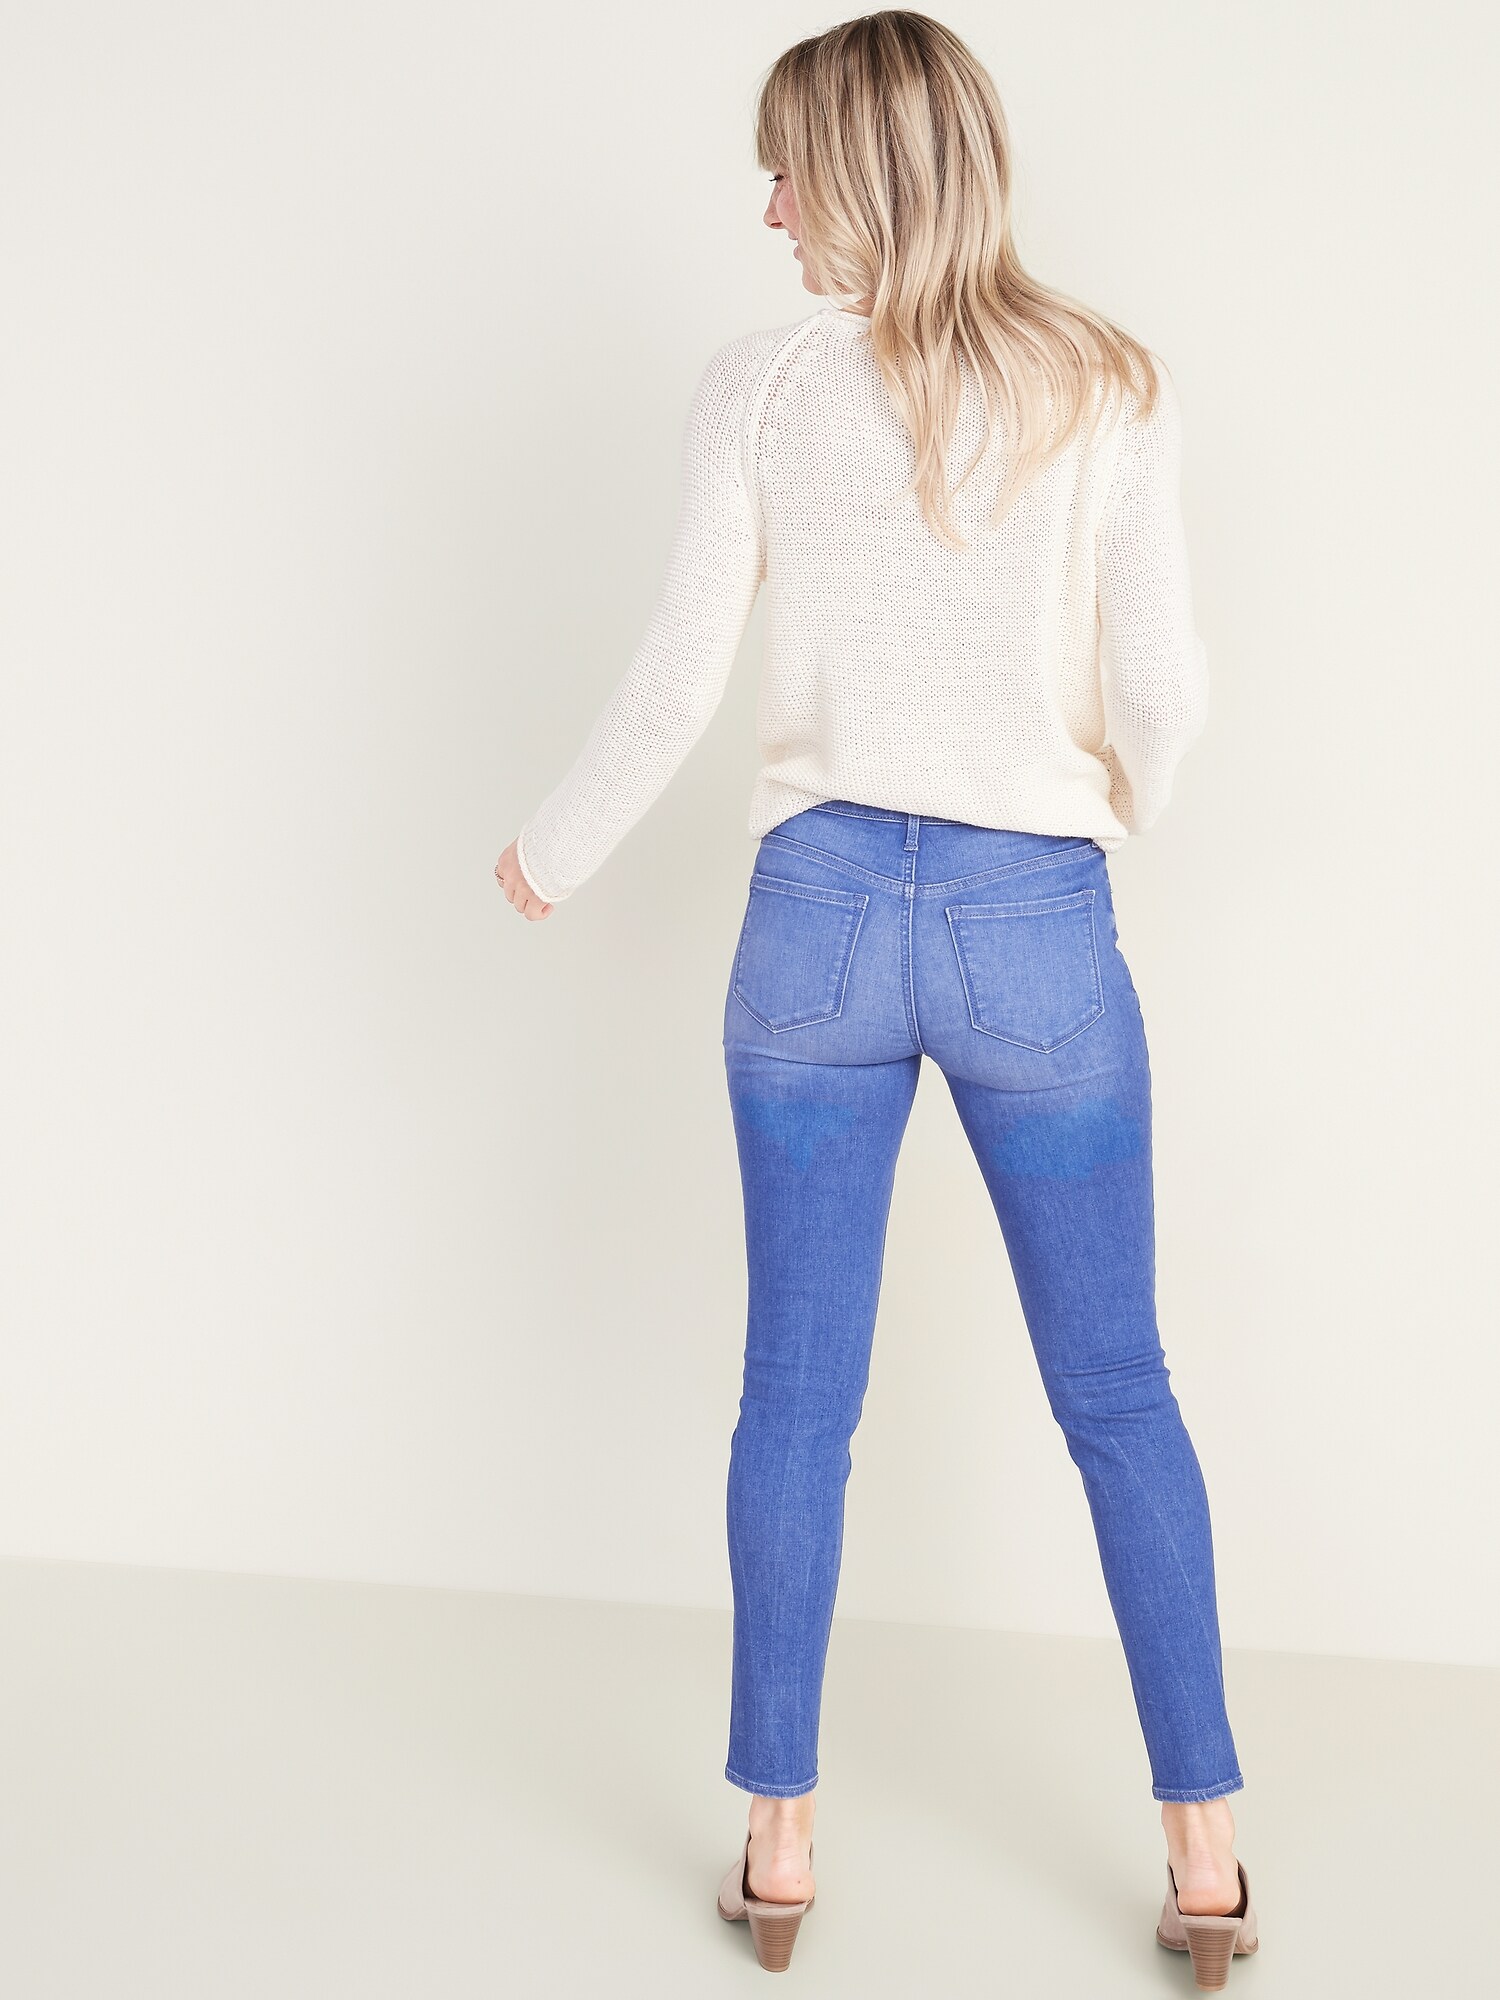 super skinny mid rise old navy